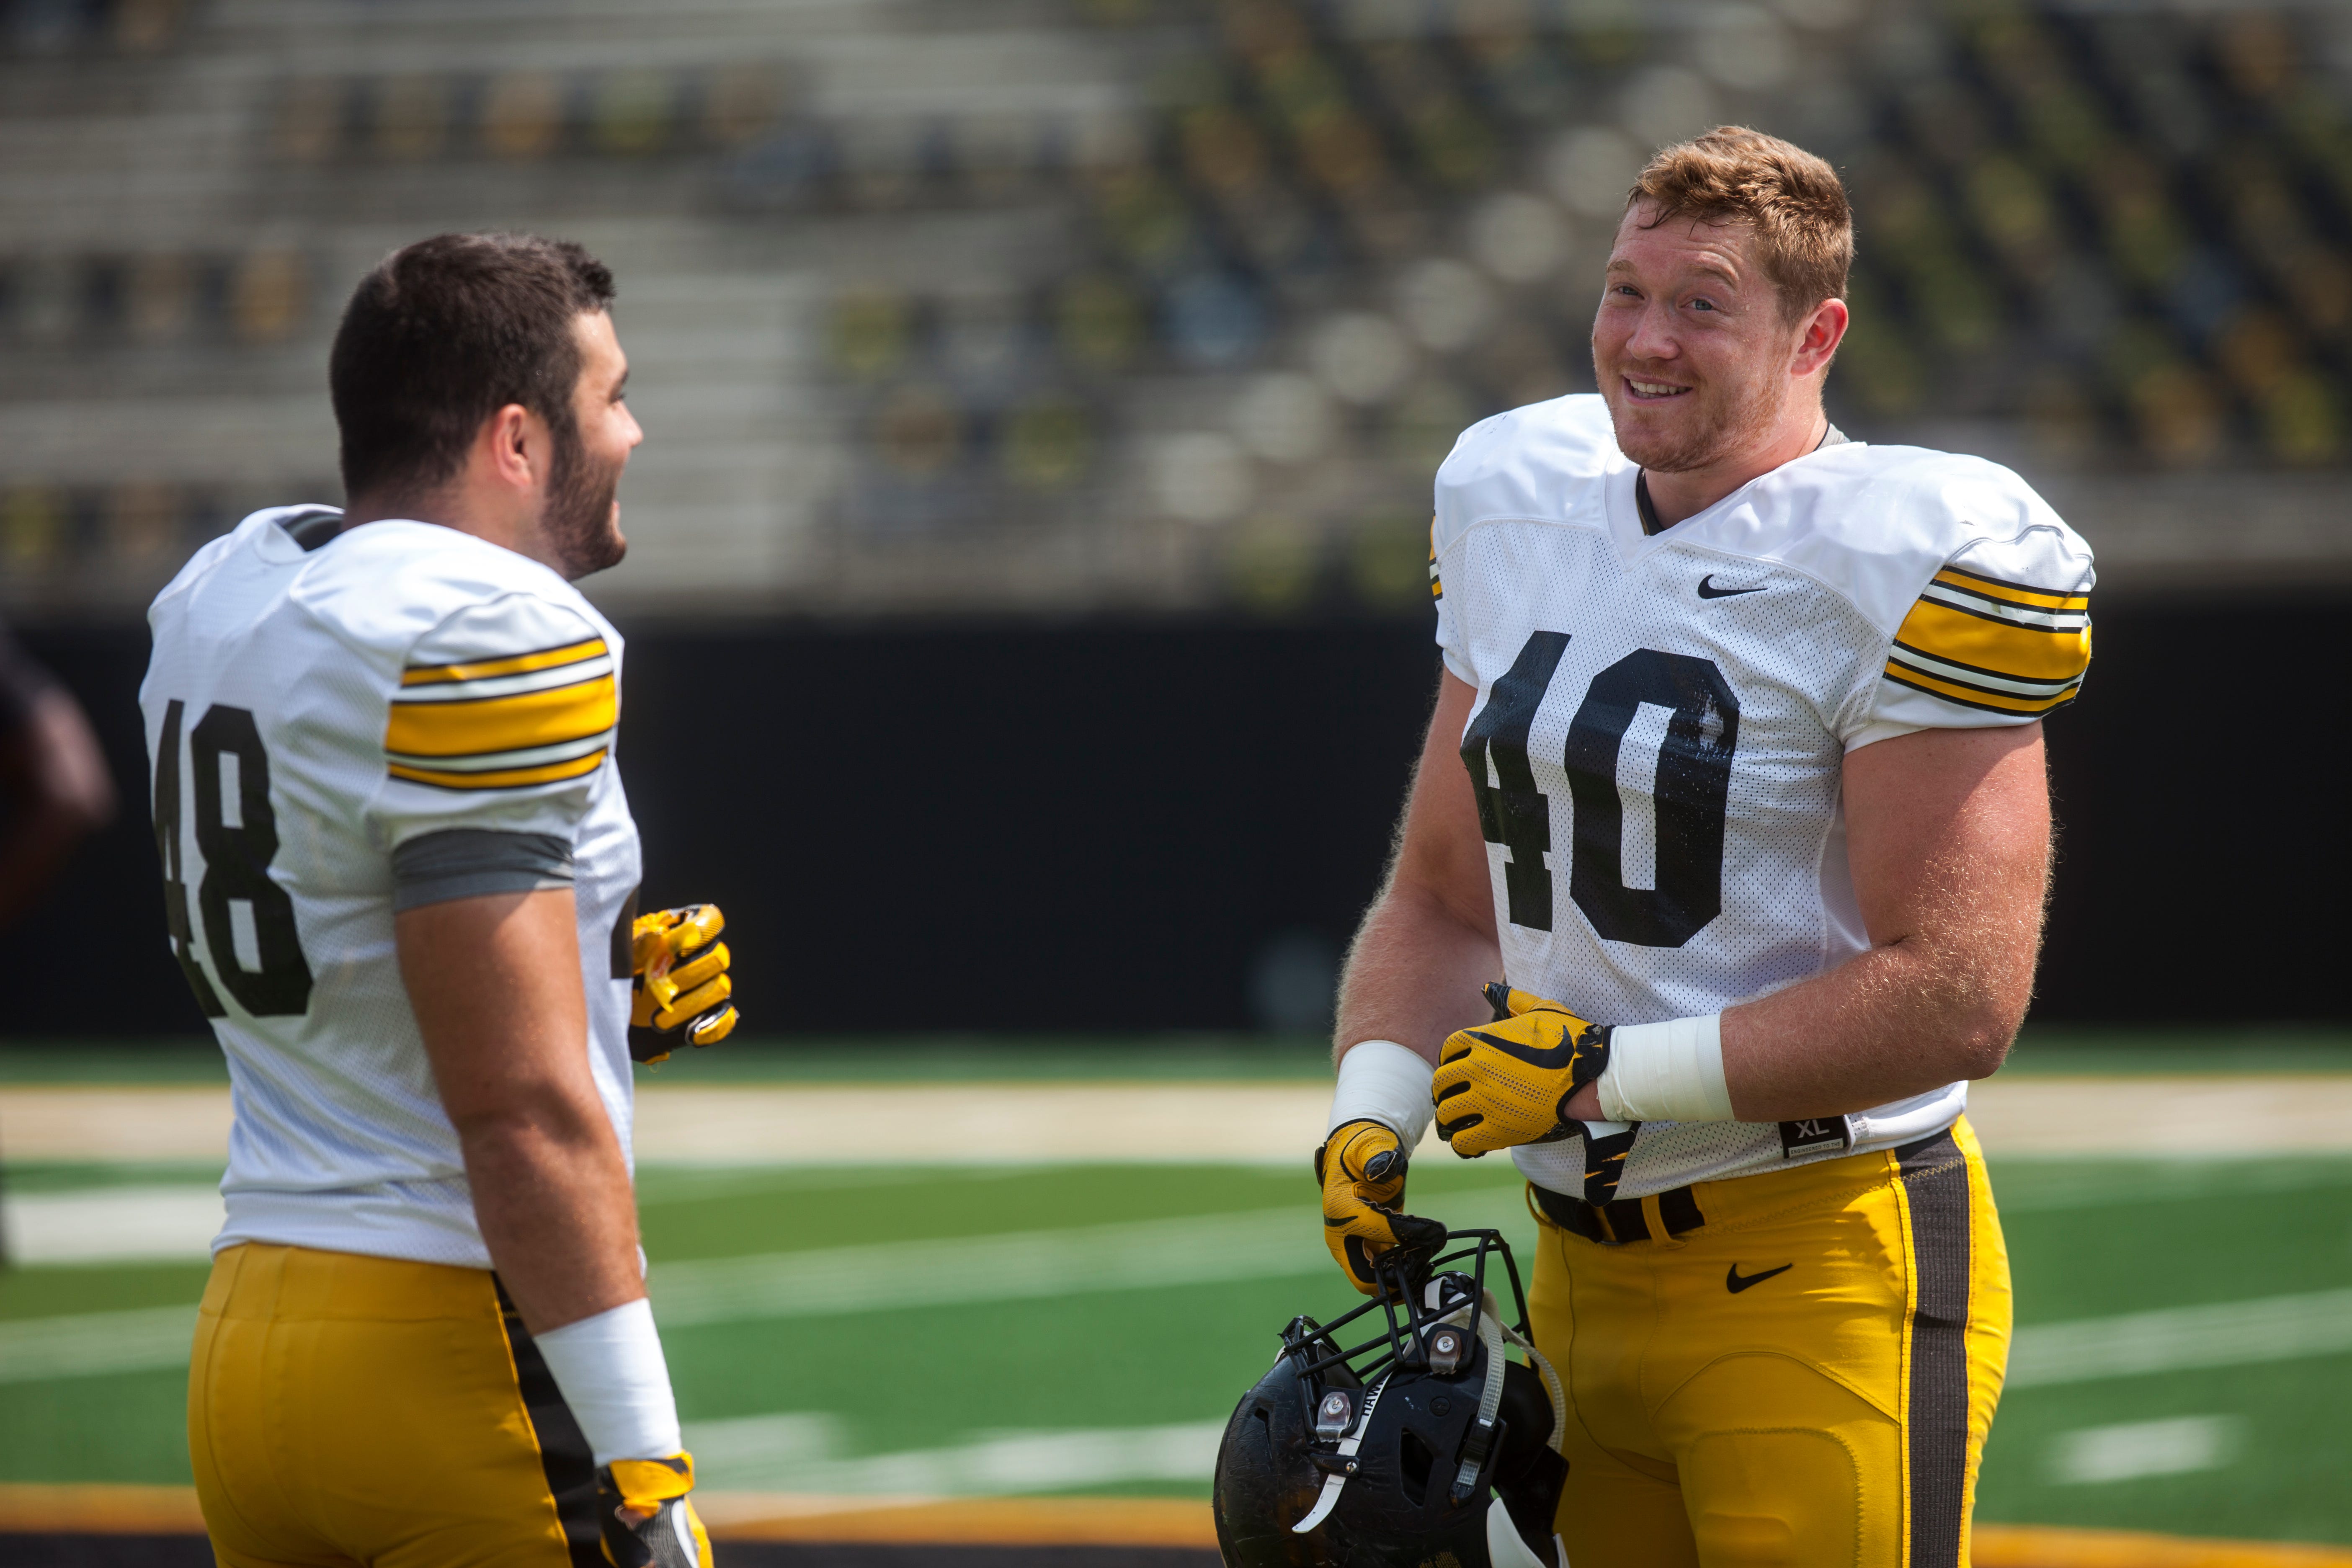 Iowa linebacker Jack Hockaday talks with defensive end Parker Hesse during a Kids Day practice on Saturday, Aug. 11, 2018, at Kinnick Stadium in Iowa City.